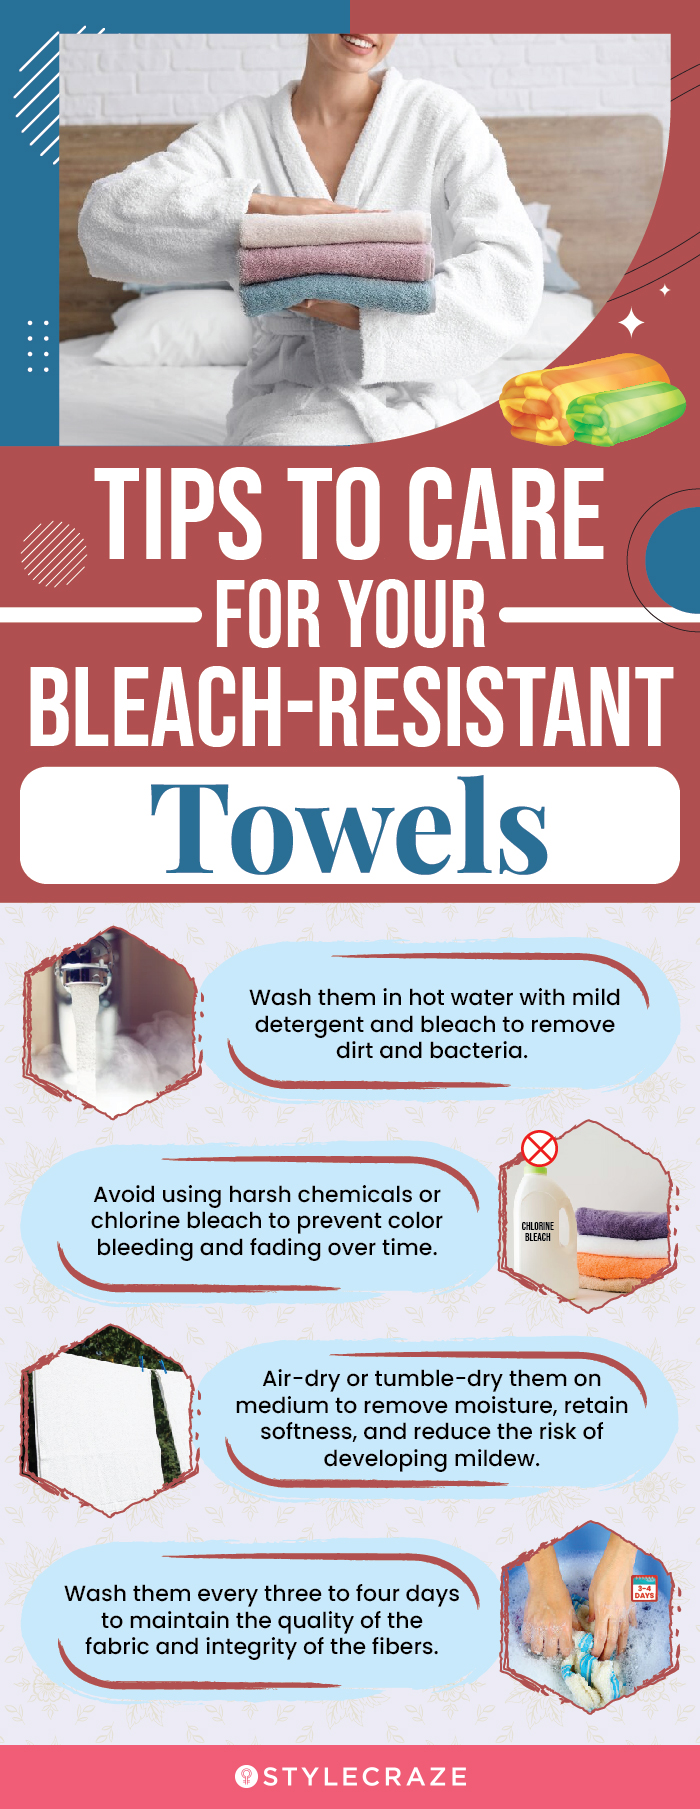 Tips To Care For Your Bleach-Resistant Towels(infographic)